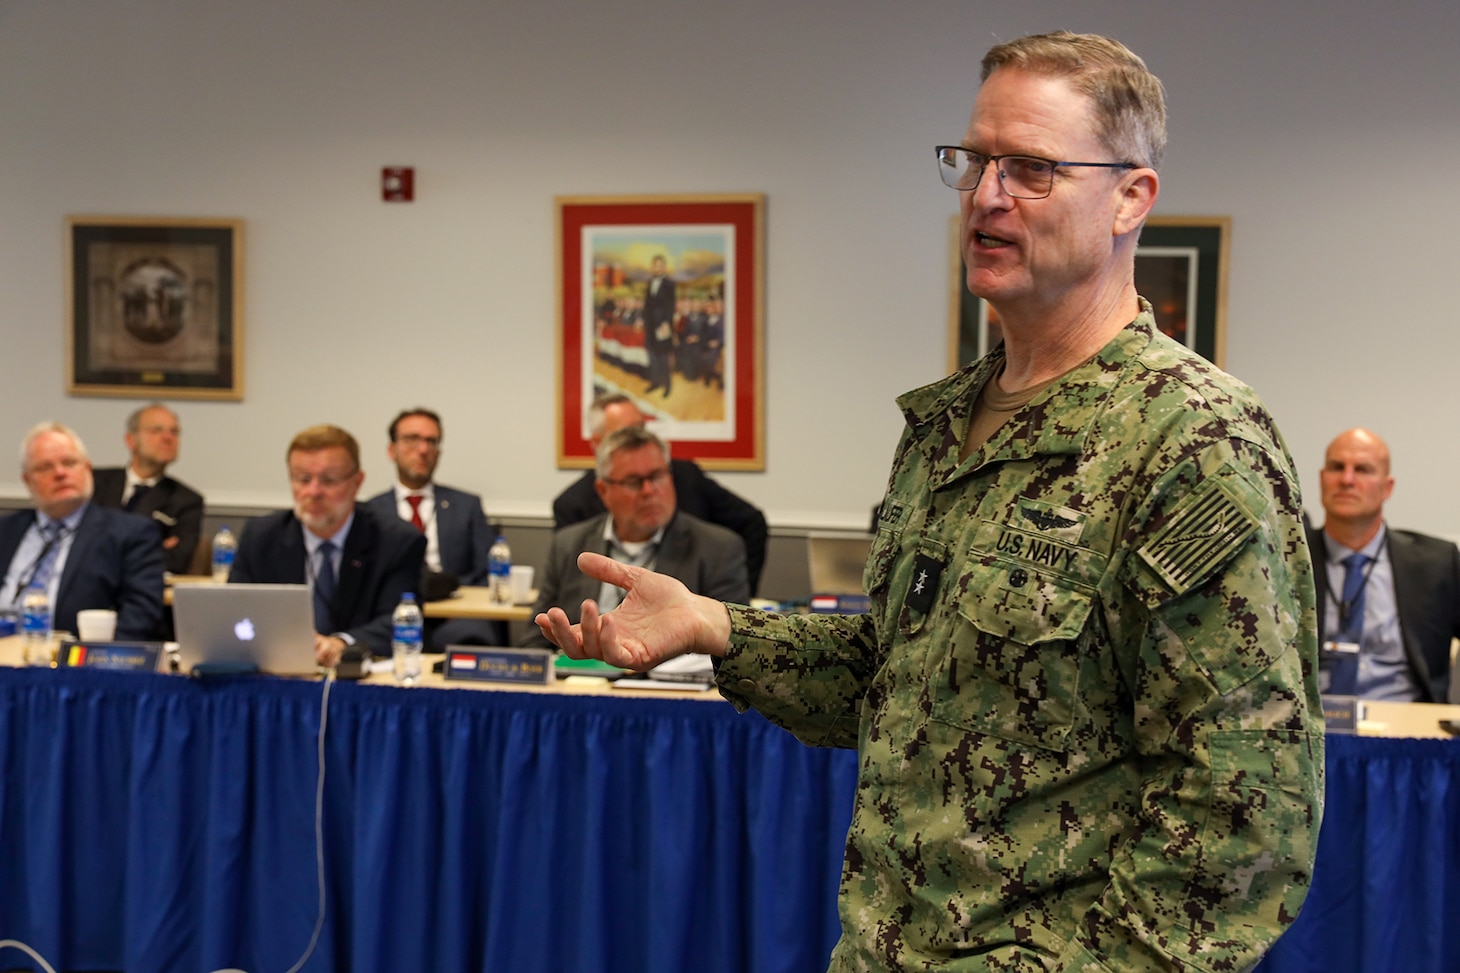 Rear Admiral Michael Wettlaufer, commander, Military Sealift Command, speaks to delegates of the North Atlantic Treaty Organization Shipping Working Group during a week-long seminar at Old Dominion University’s Virginia Modeling Analysis Simulation Center in Suffolk, Va., May 9, 2022.